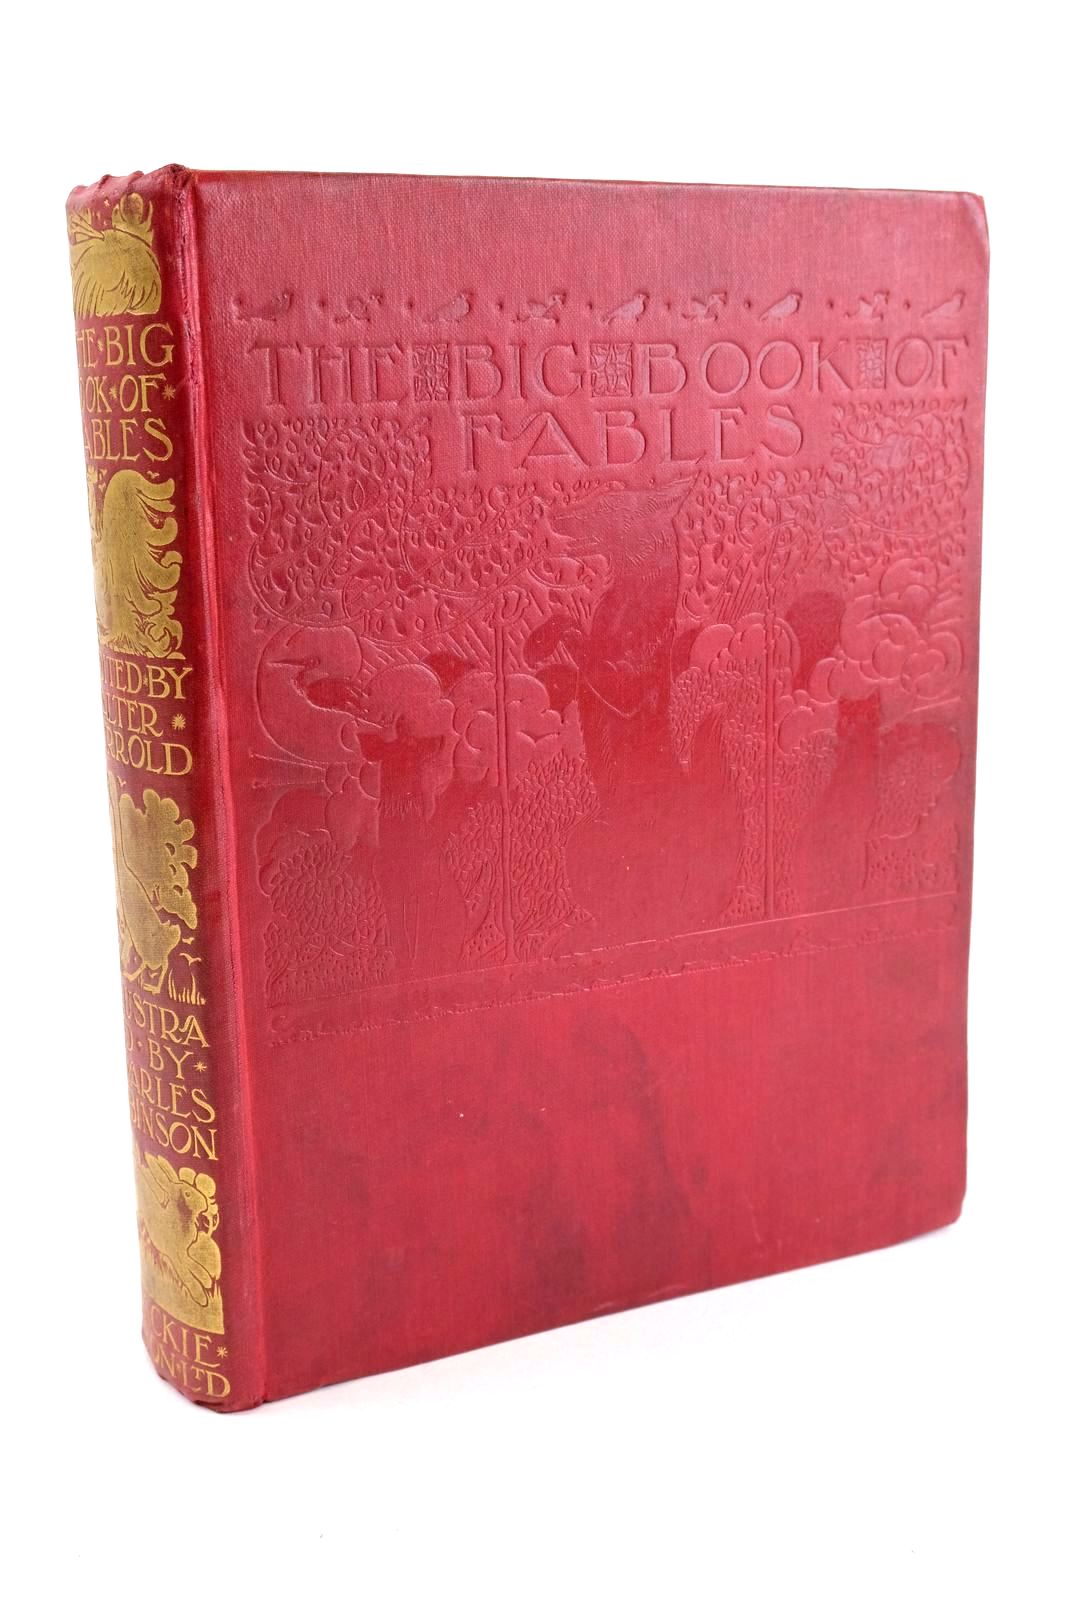 Photo of THE BIG BOOK OF FABLES- Stock Number: 1324333